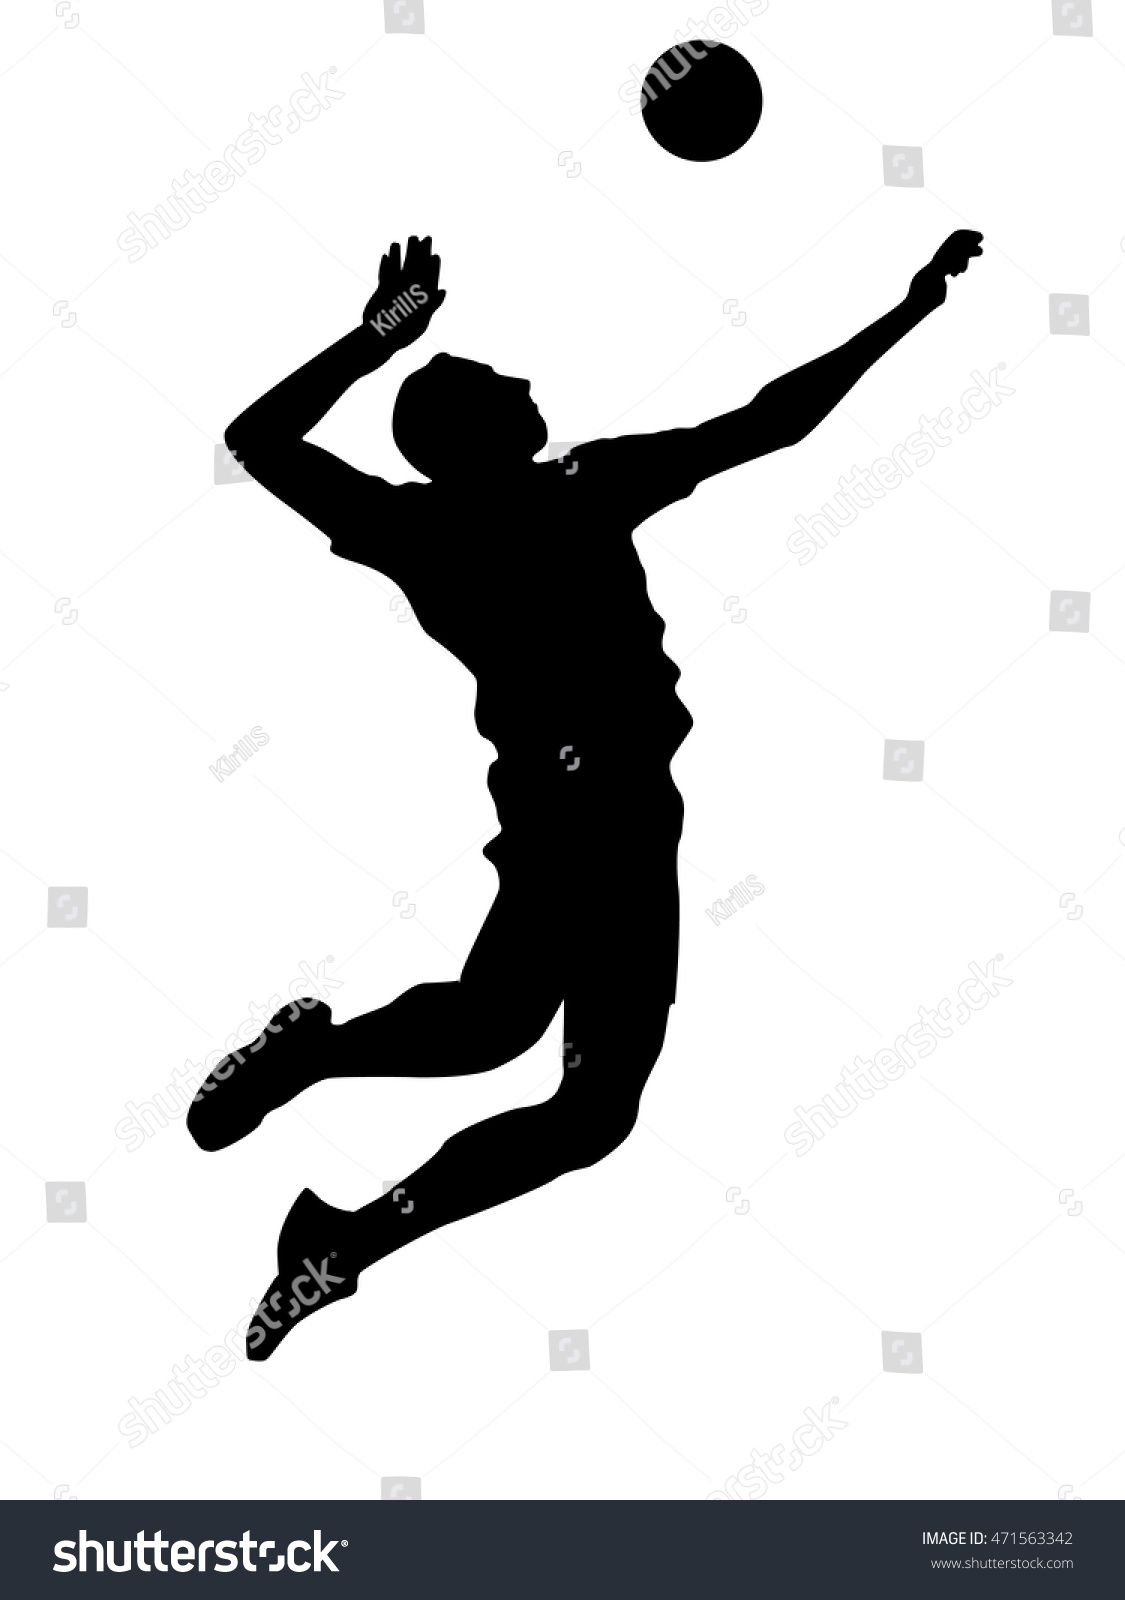 Illustration Abstract Volleyball Player Silhouette Stock Vector ...